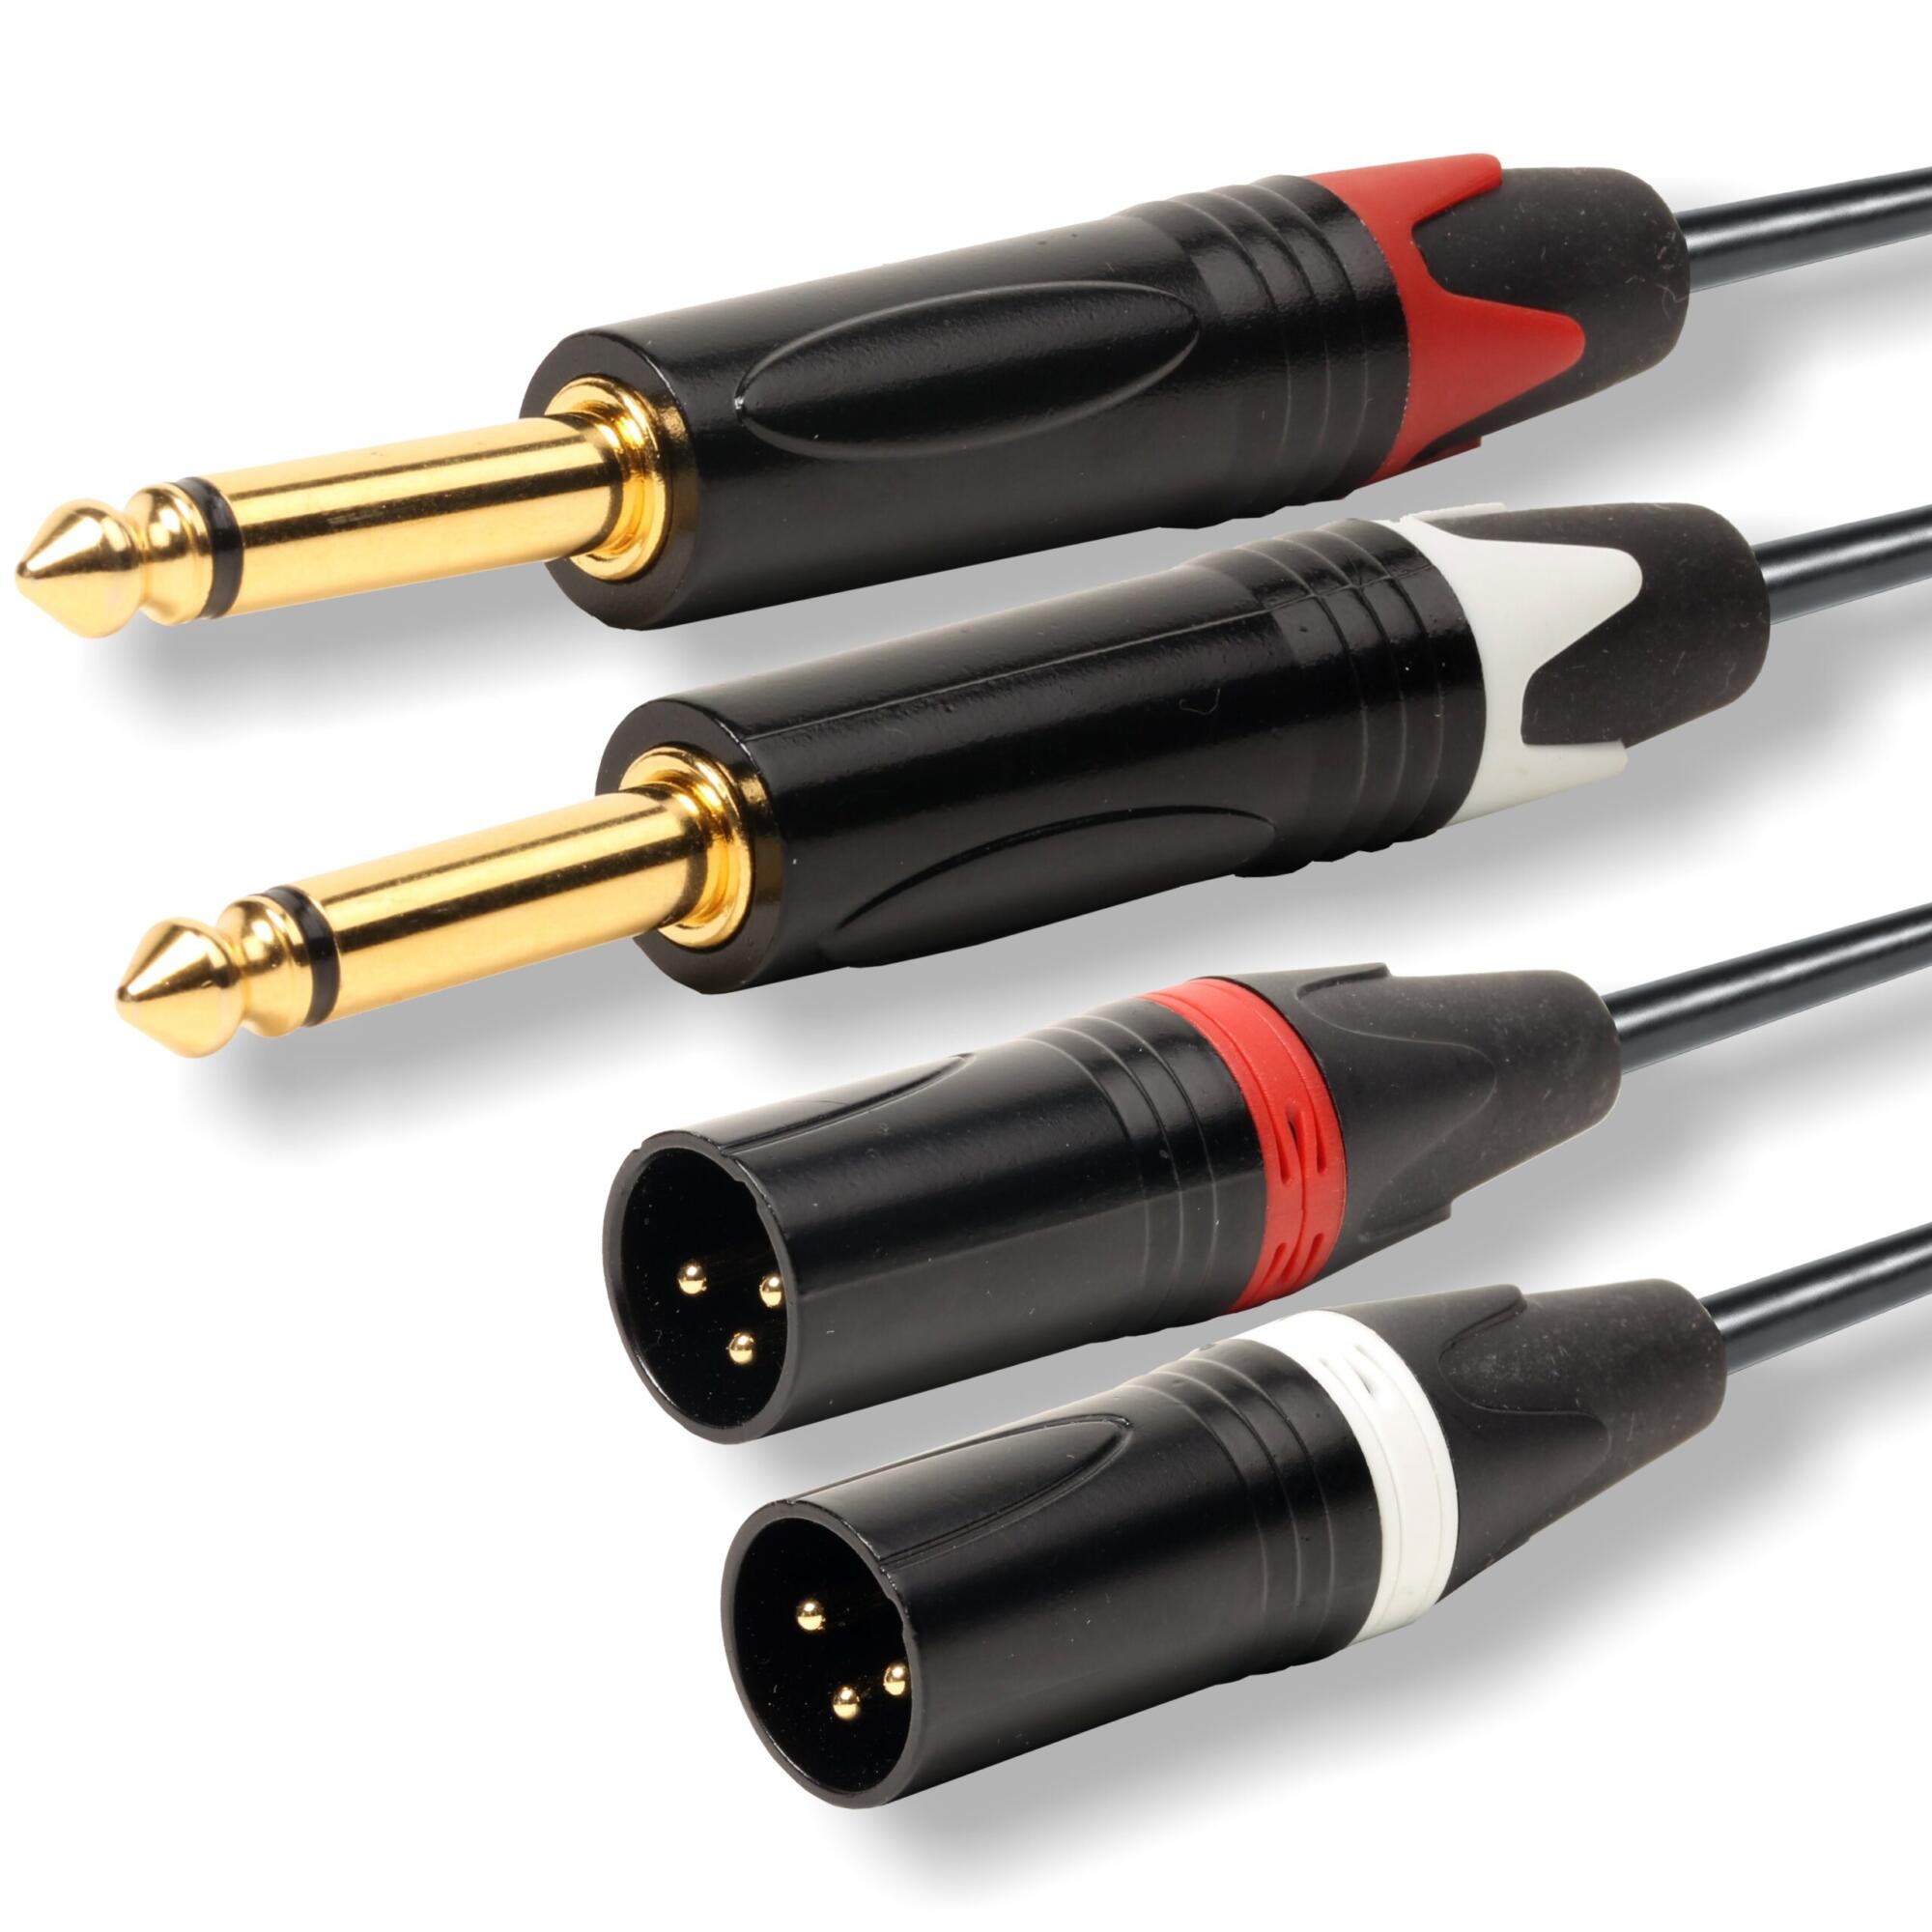 Sound and audio cable with 6.3 mono jack and XLR connectors from Emelec ViasCom